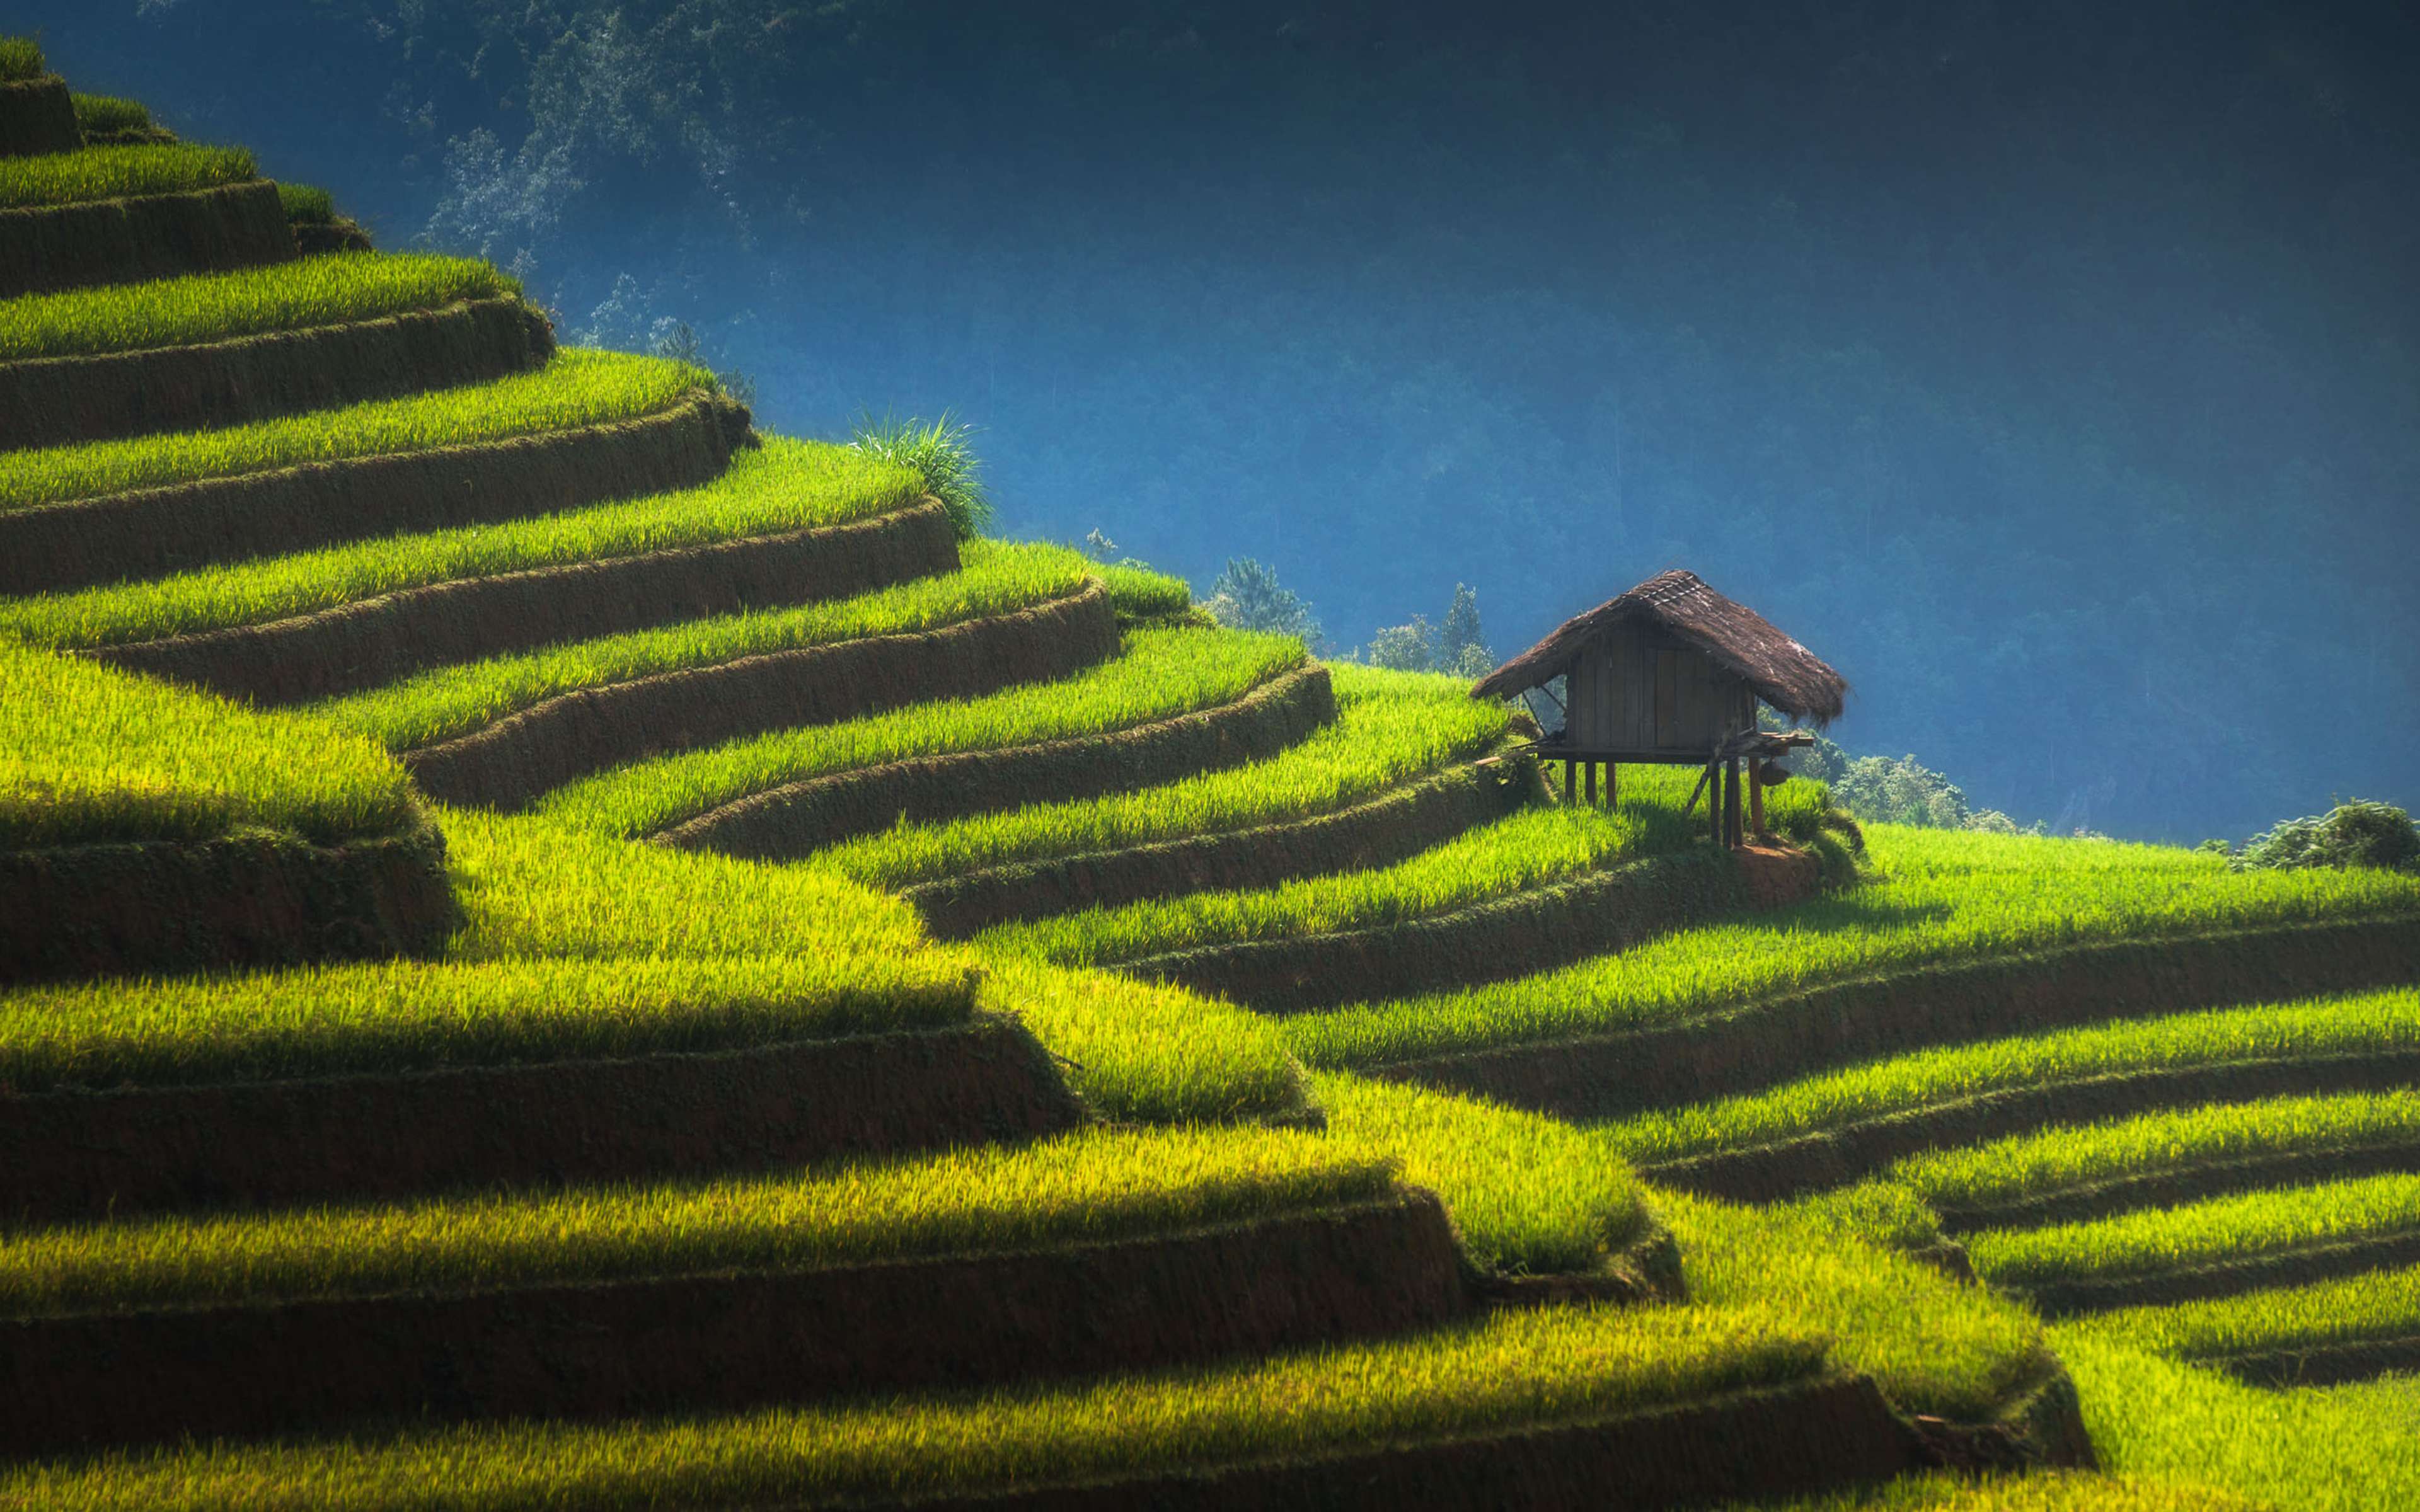 Home on the hill of beautiful rice fields in Vietnam.